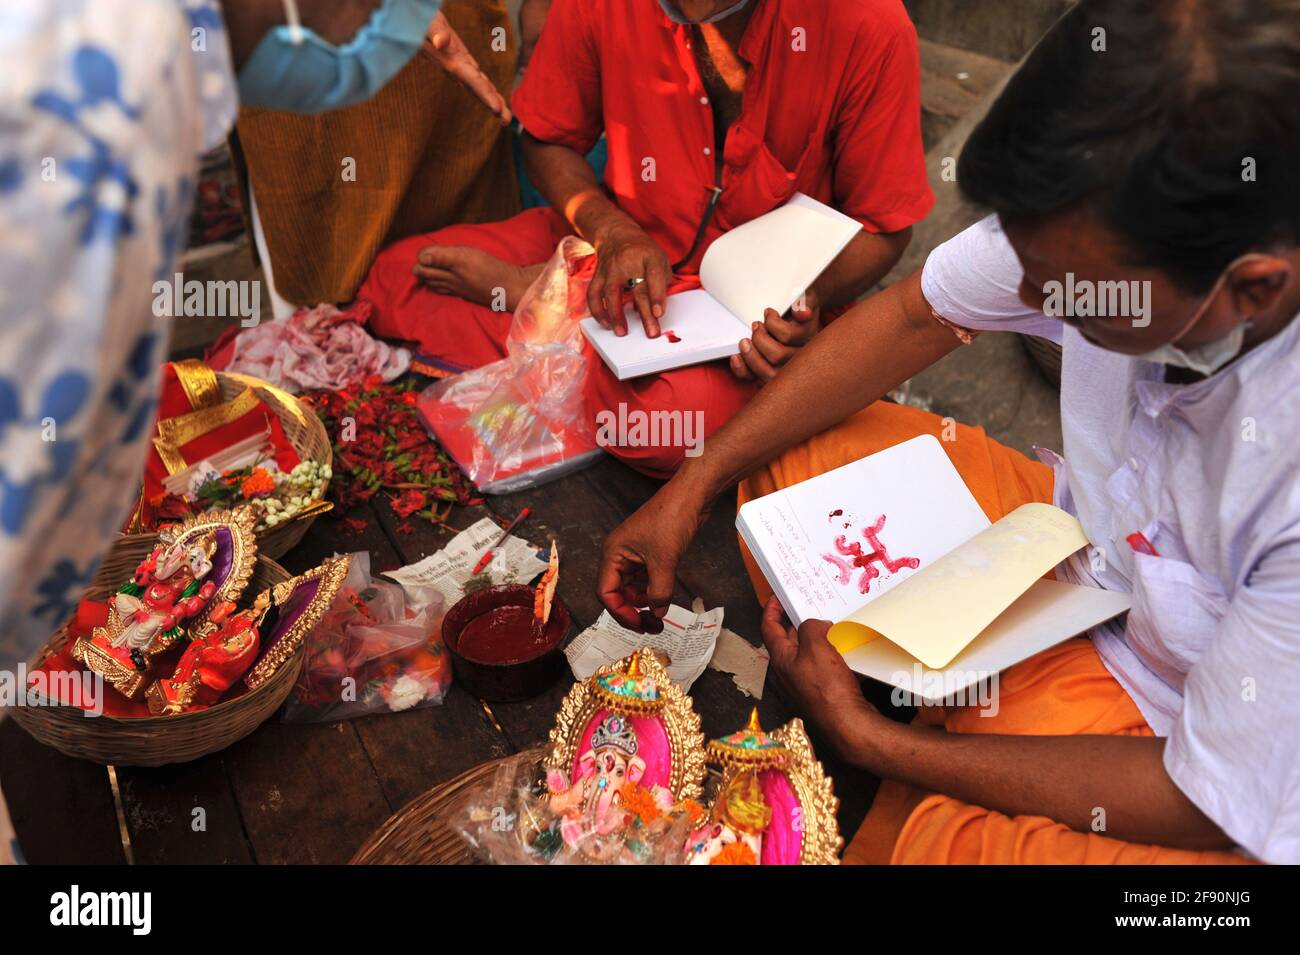 Kolkata, West Bengal, India. 15th Apr, 2021. People buying idols of to worship on Bengali New Year in Kolkata. Each year on April 15th, is the first day of Bengali New Year, celebrates globally by the Bengali speaking person. It was during the reign of Emperor Akbar during the Mughal rule in India, celebration of Bengali New Year began on this day. People worship Goddess Laxmi and God Ganesh, for wealth and prosperity with a morning ritual. This day is also beginning of the Bengali financial year when traders and businessman they do performs ritual of their books of accounts. It's an auspici Stock Photo